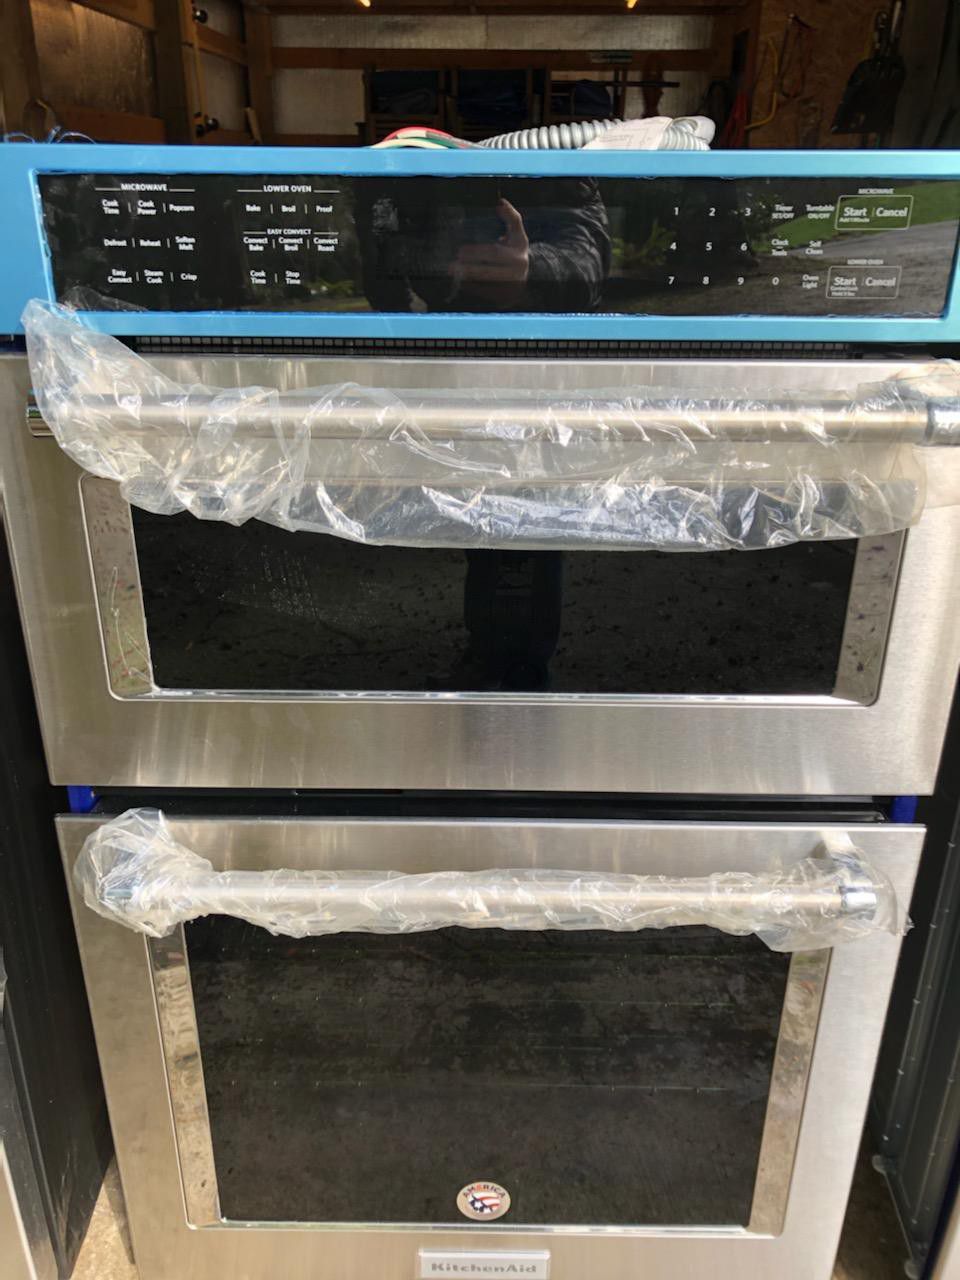 *NEW* Stainless steel KitchenAid Microwave/Wall Oven Combo